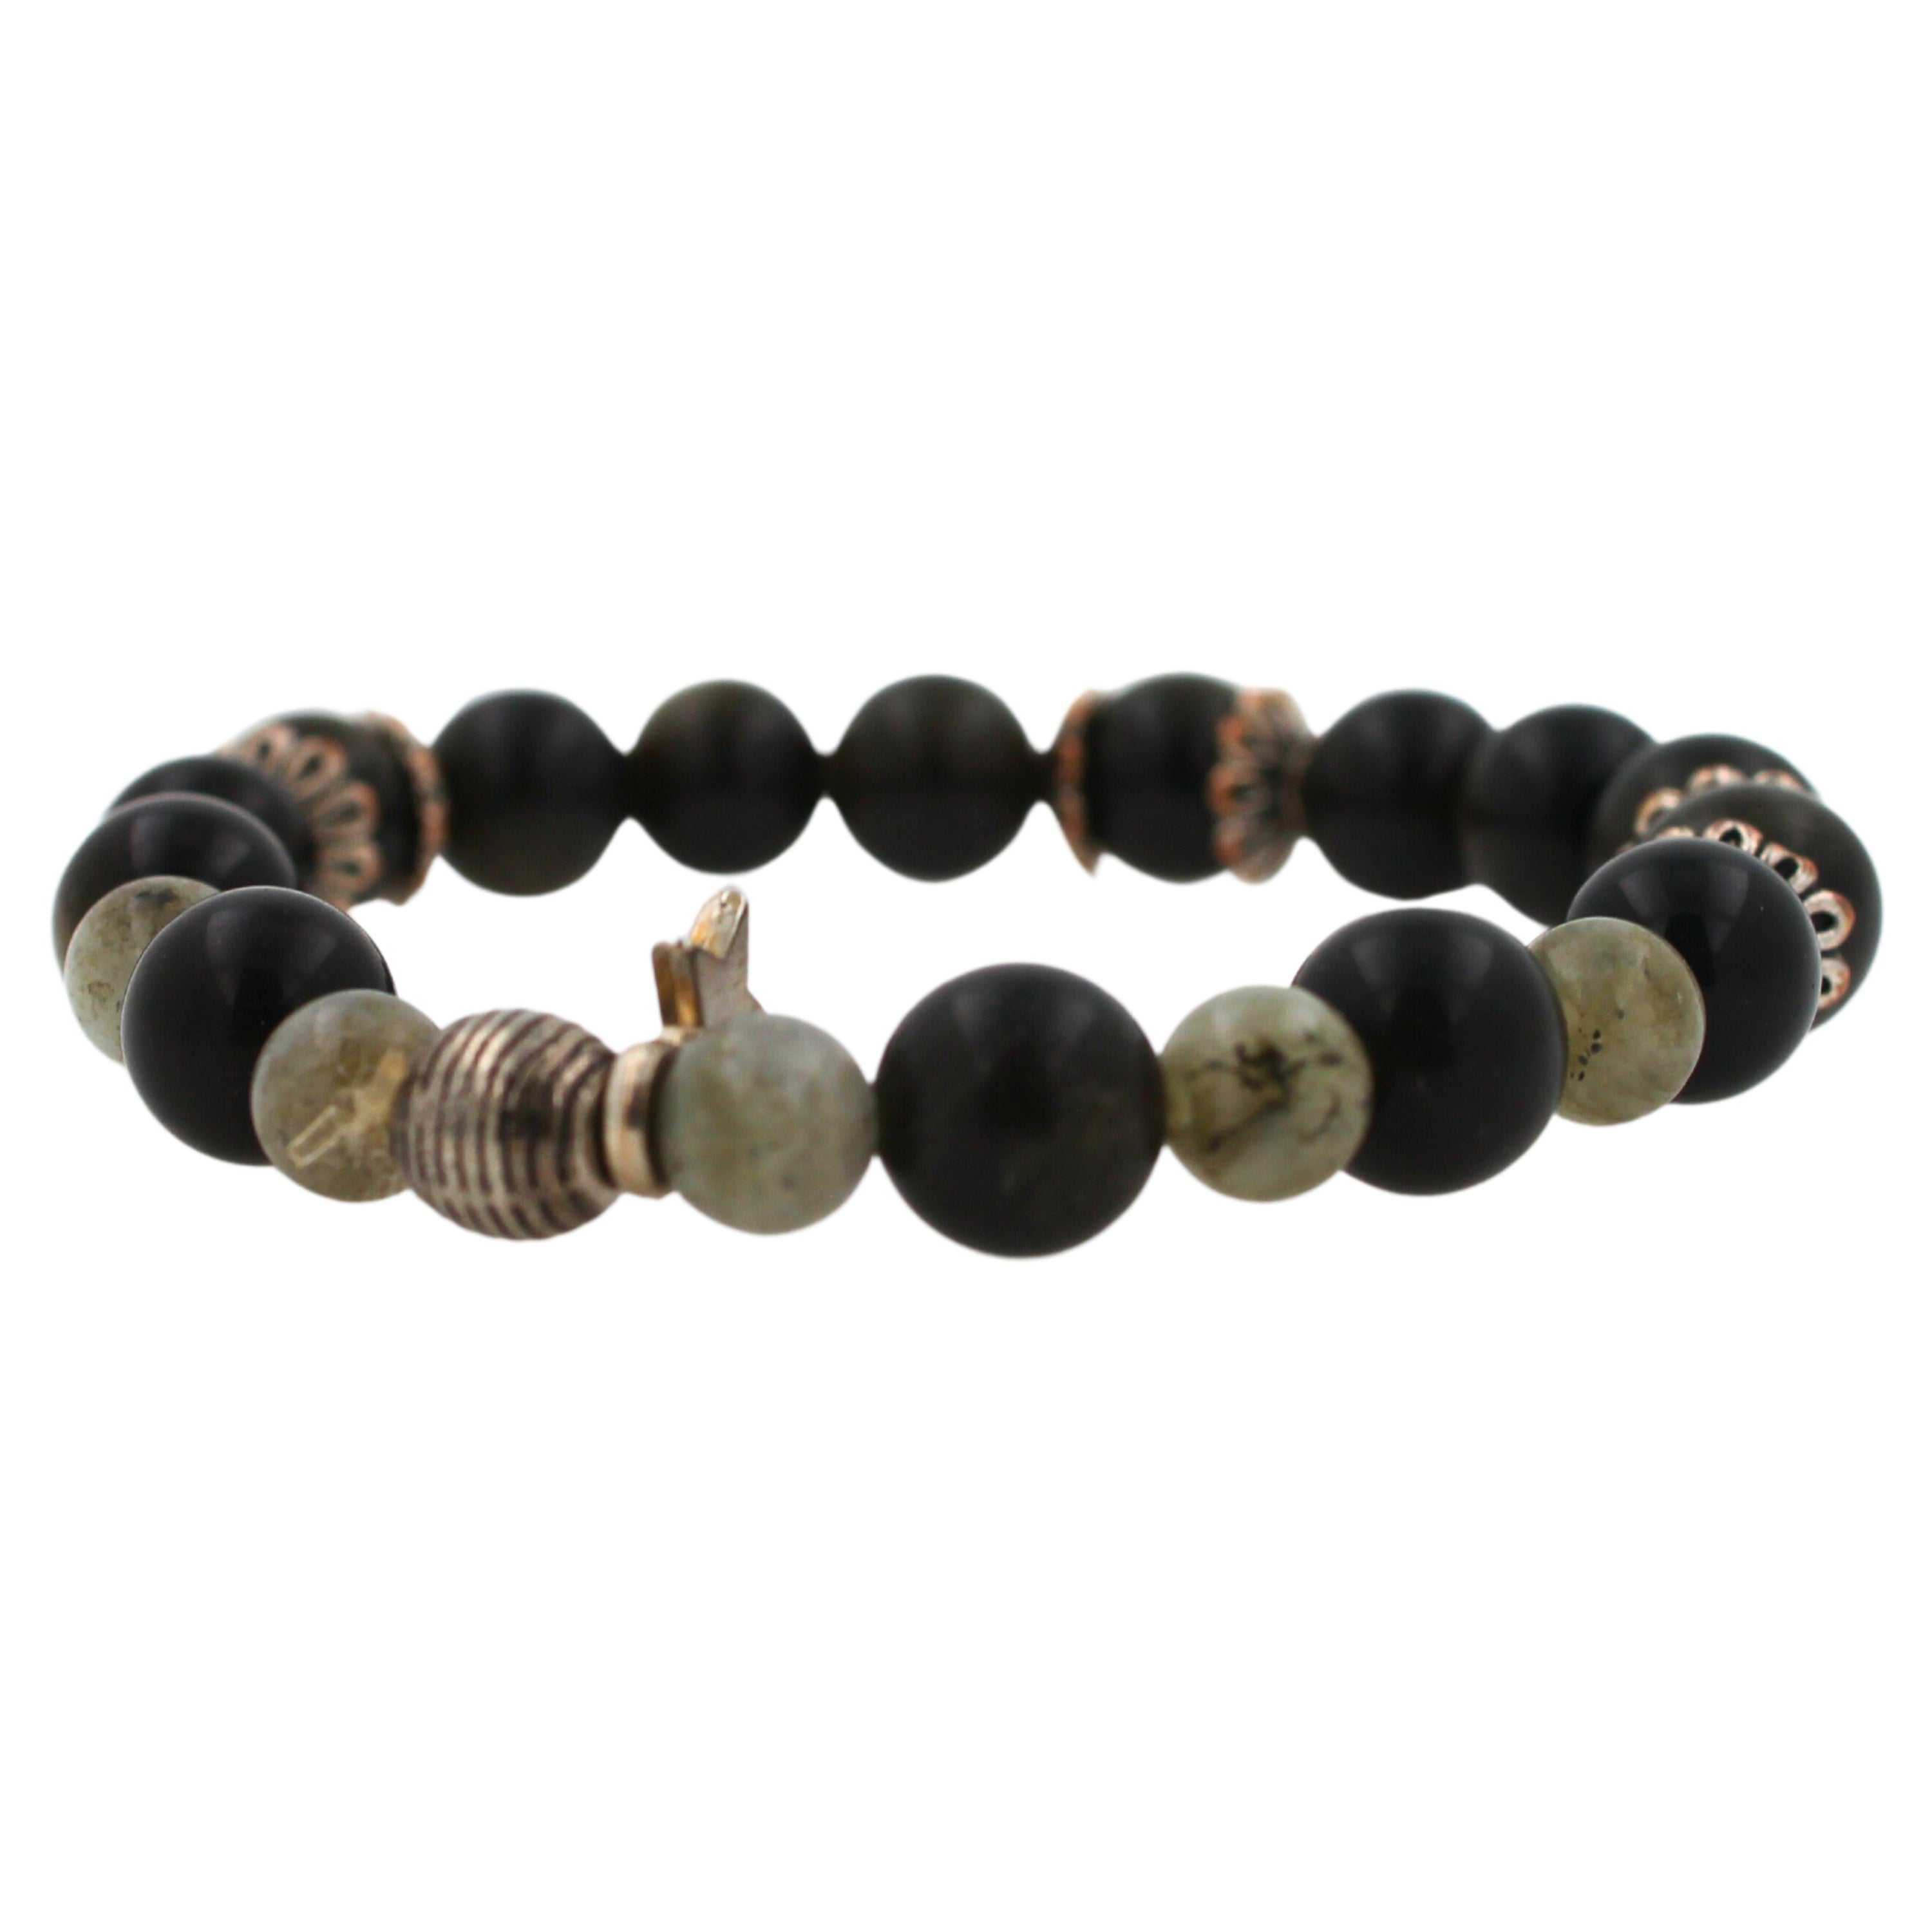 Black Agate Earth Gemstone Round Chakra Beads Stretchy Unique Statement Bracelet For Sale